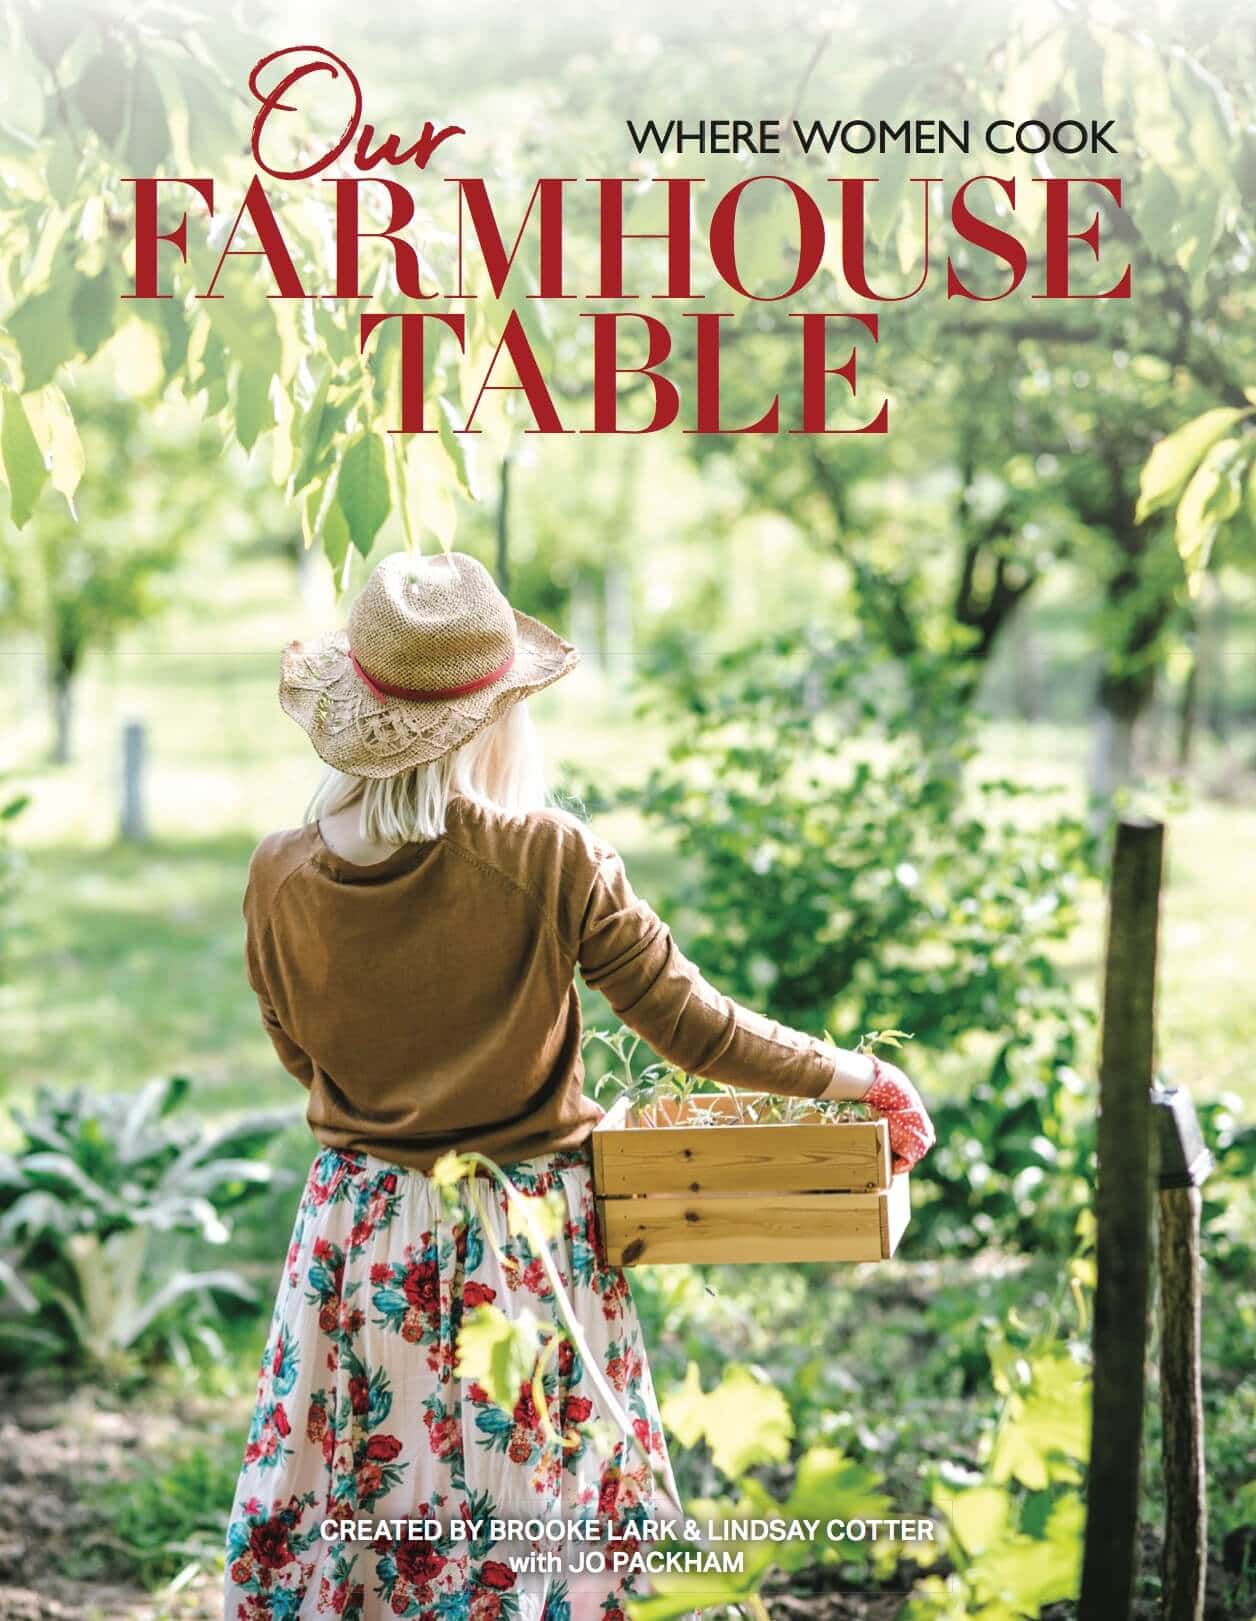 Spring 2019 Our Farmhouse Table issue of Where Women Cook featuring Stacy Lyn Harris